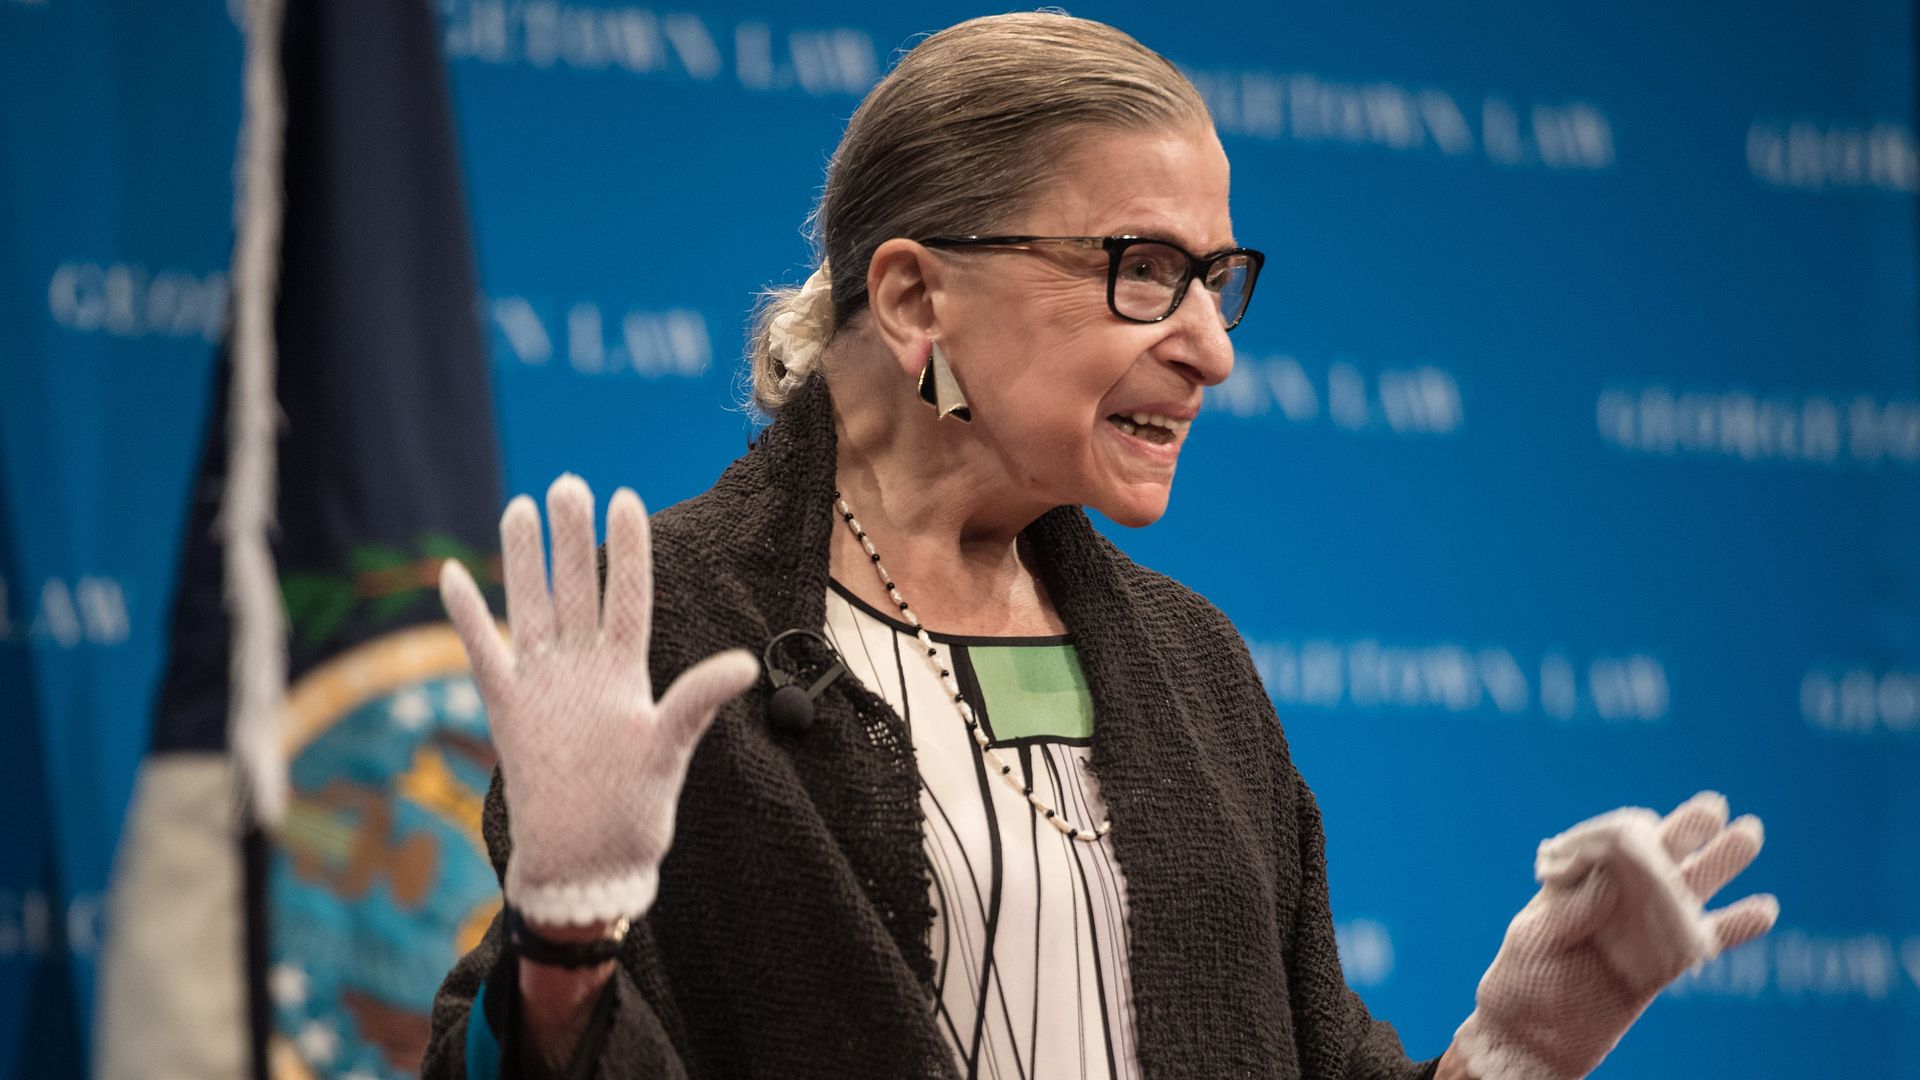 Former Supreme Court Justice Ruth Bader Ginsburg acknowledging applause at Georgetown University in Washington, D.C., in September 2017.